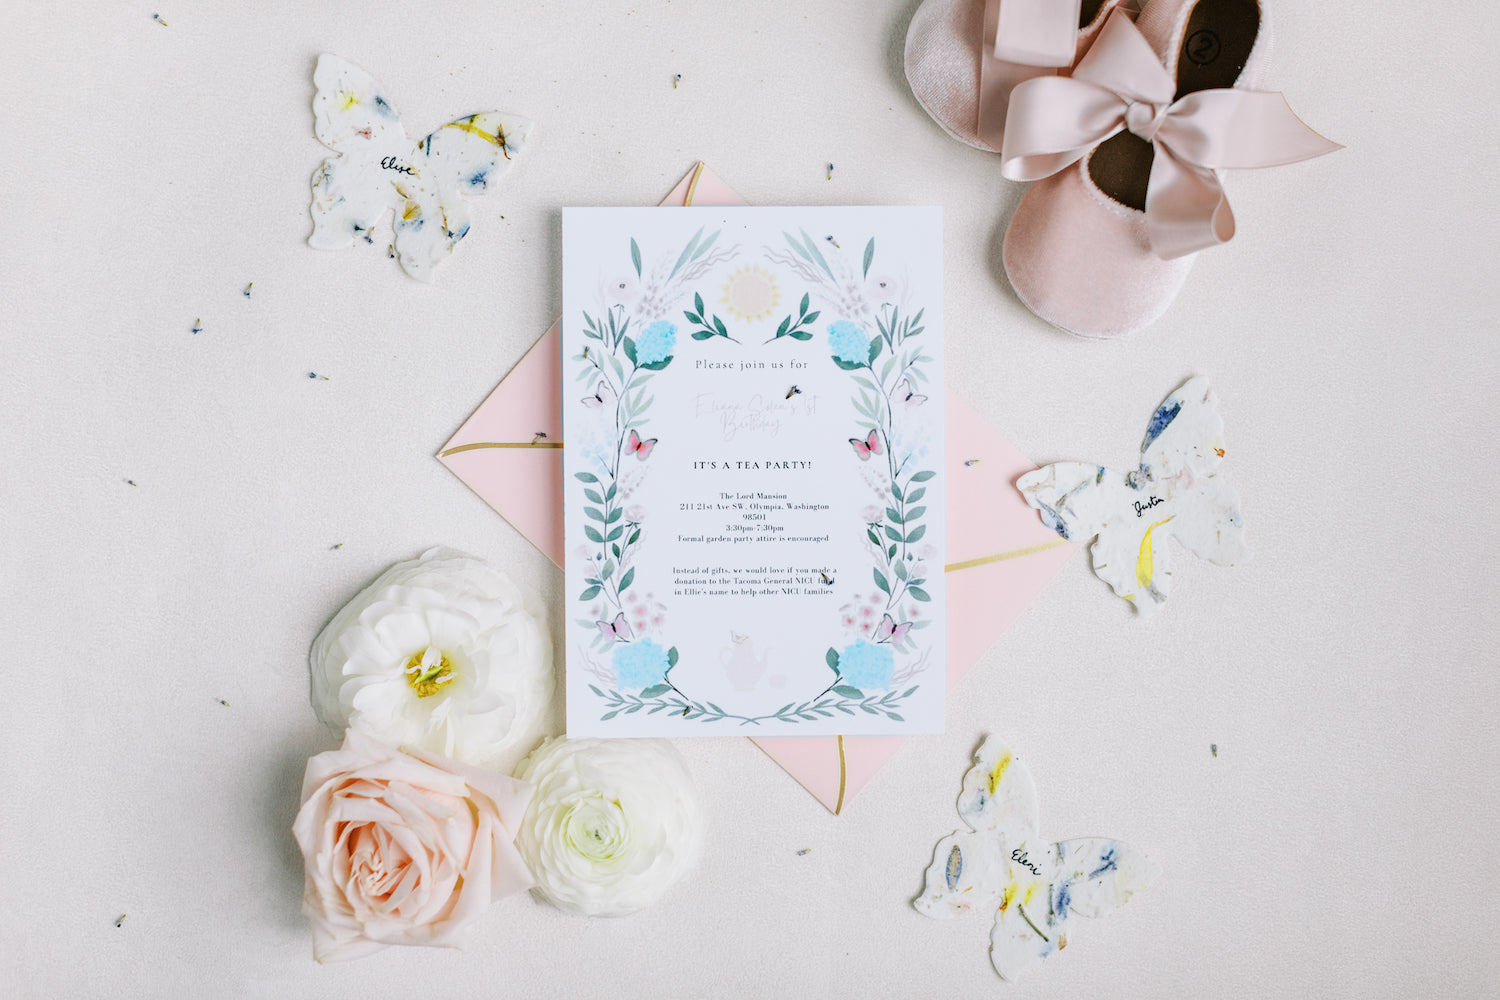 Tea party birthday party inspiration Olympia Washington Floral and butterfly invitation